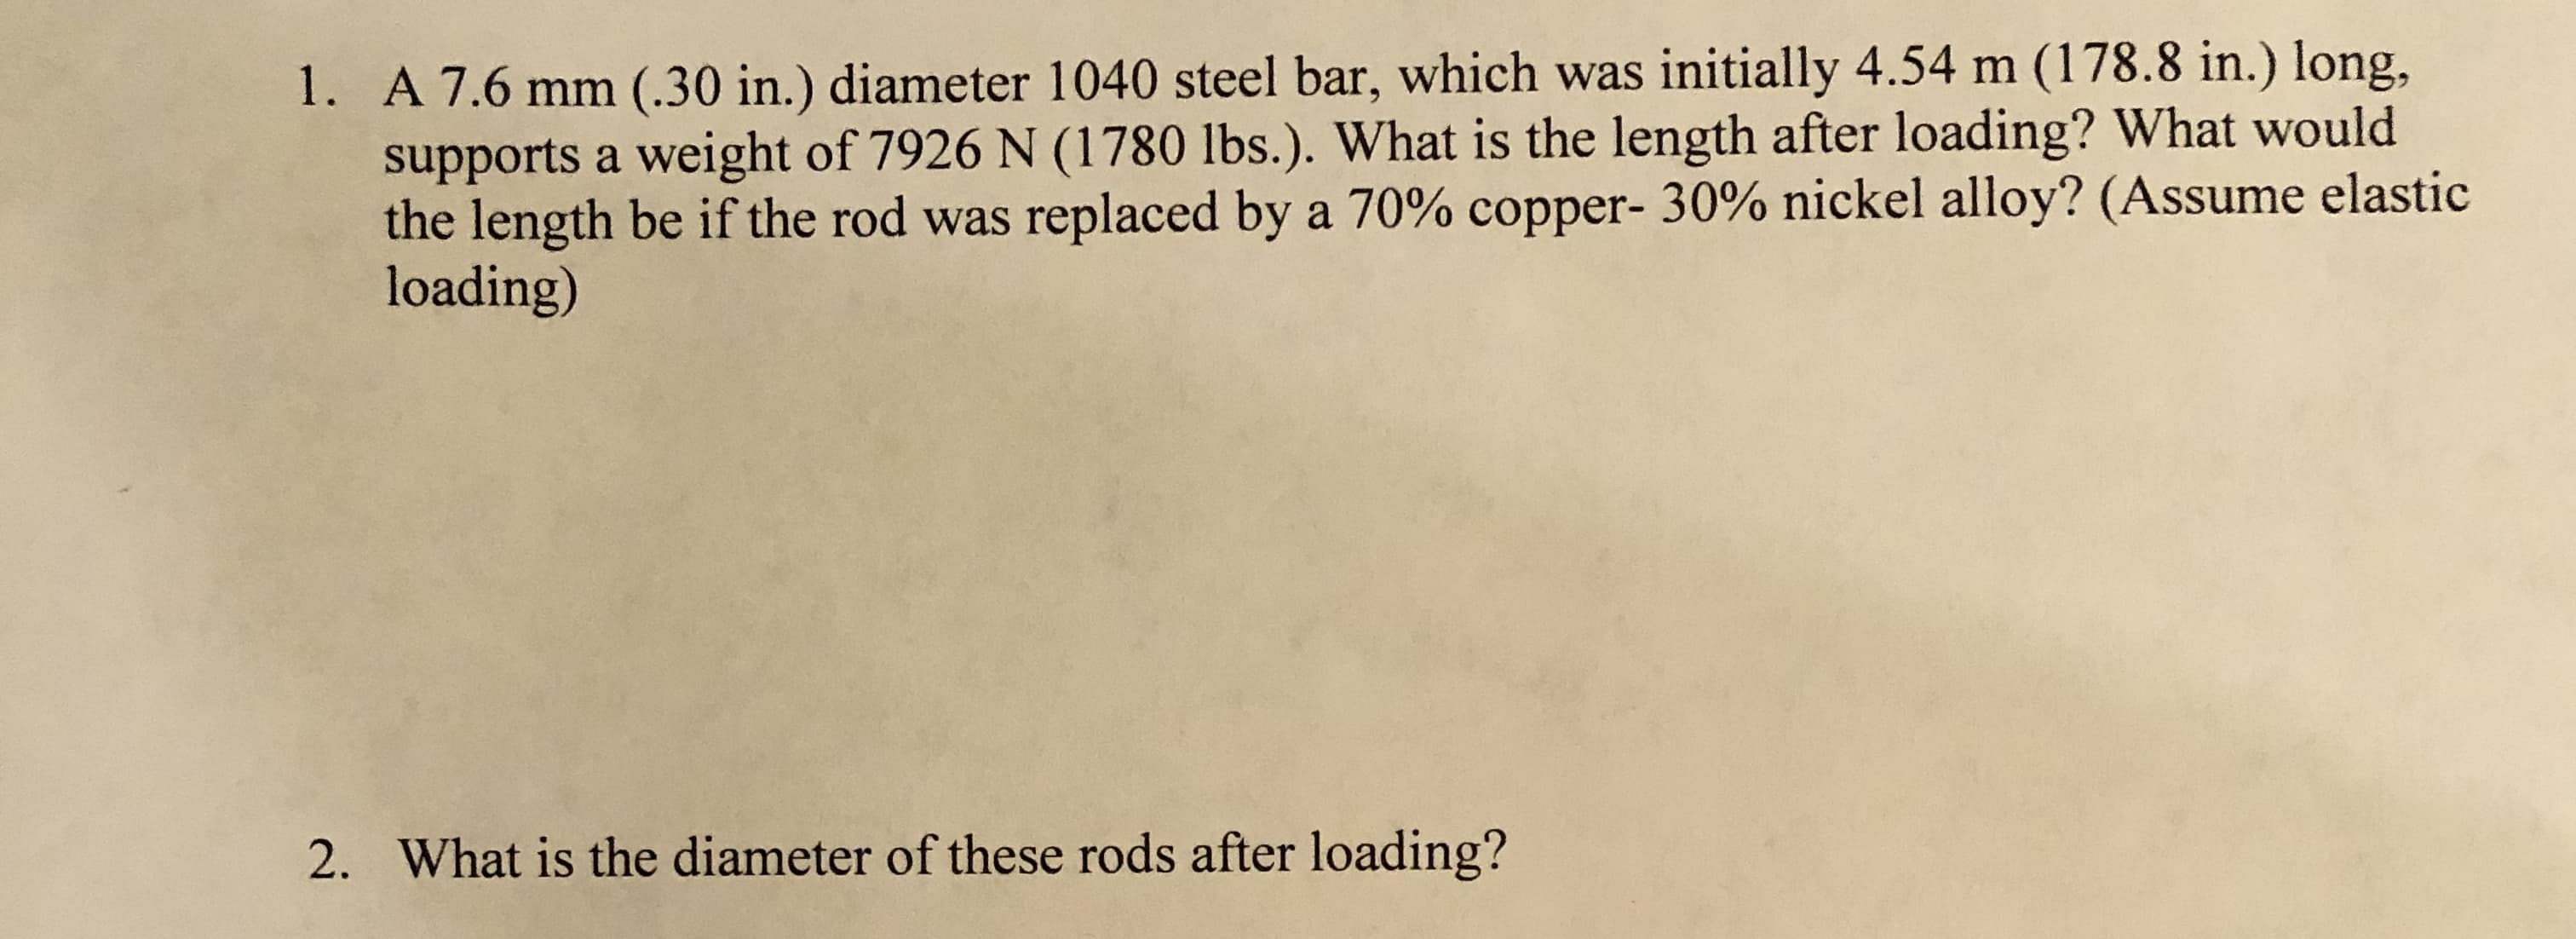 1. A 7.6 mm (.30 in.) diameter 1040 steel bar, which was initially 4.54 m (178.8 in.) long,
supports a weight of 7926 N (1780 lbs.). What is the length after loading? What would
the length be if the rod was replaced by a 70% copper- 30% nickel alloy? (Assume elastic
loading)
What is the diameter of these rods after loading?
2.
